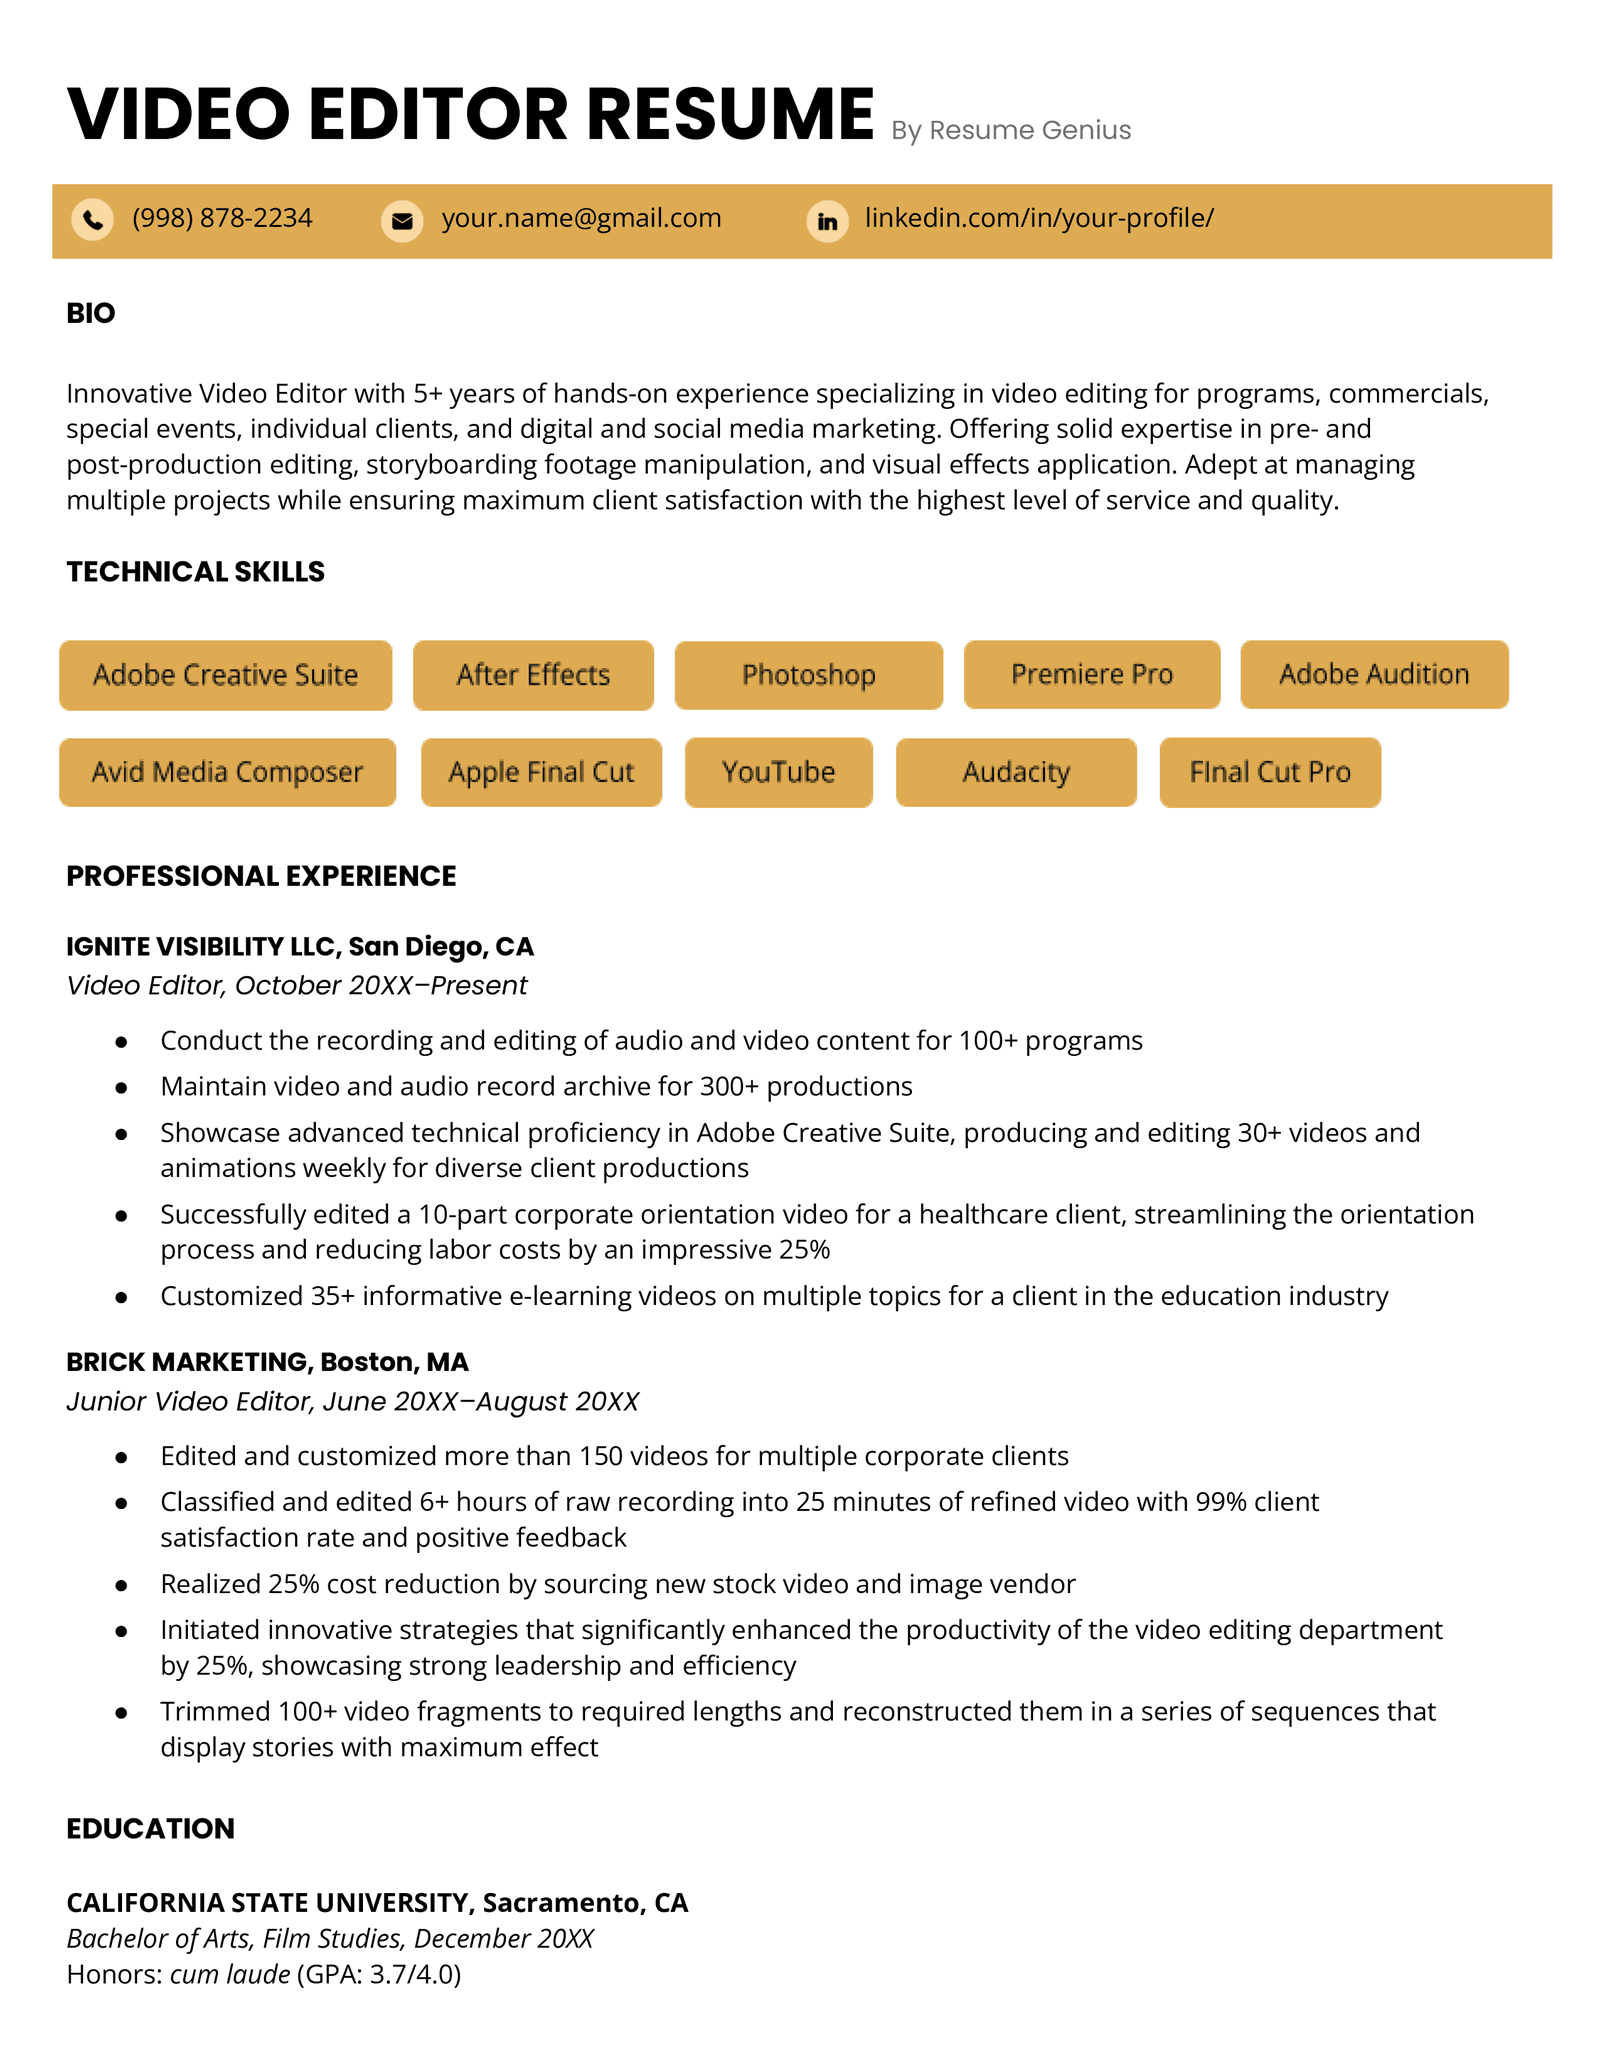 A video editor resume sample using the Advanced resume template in yellow.